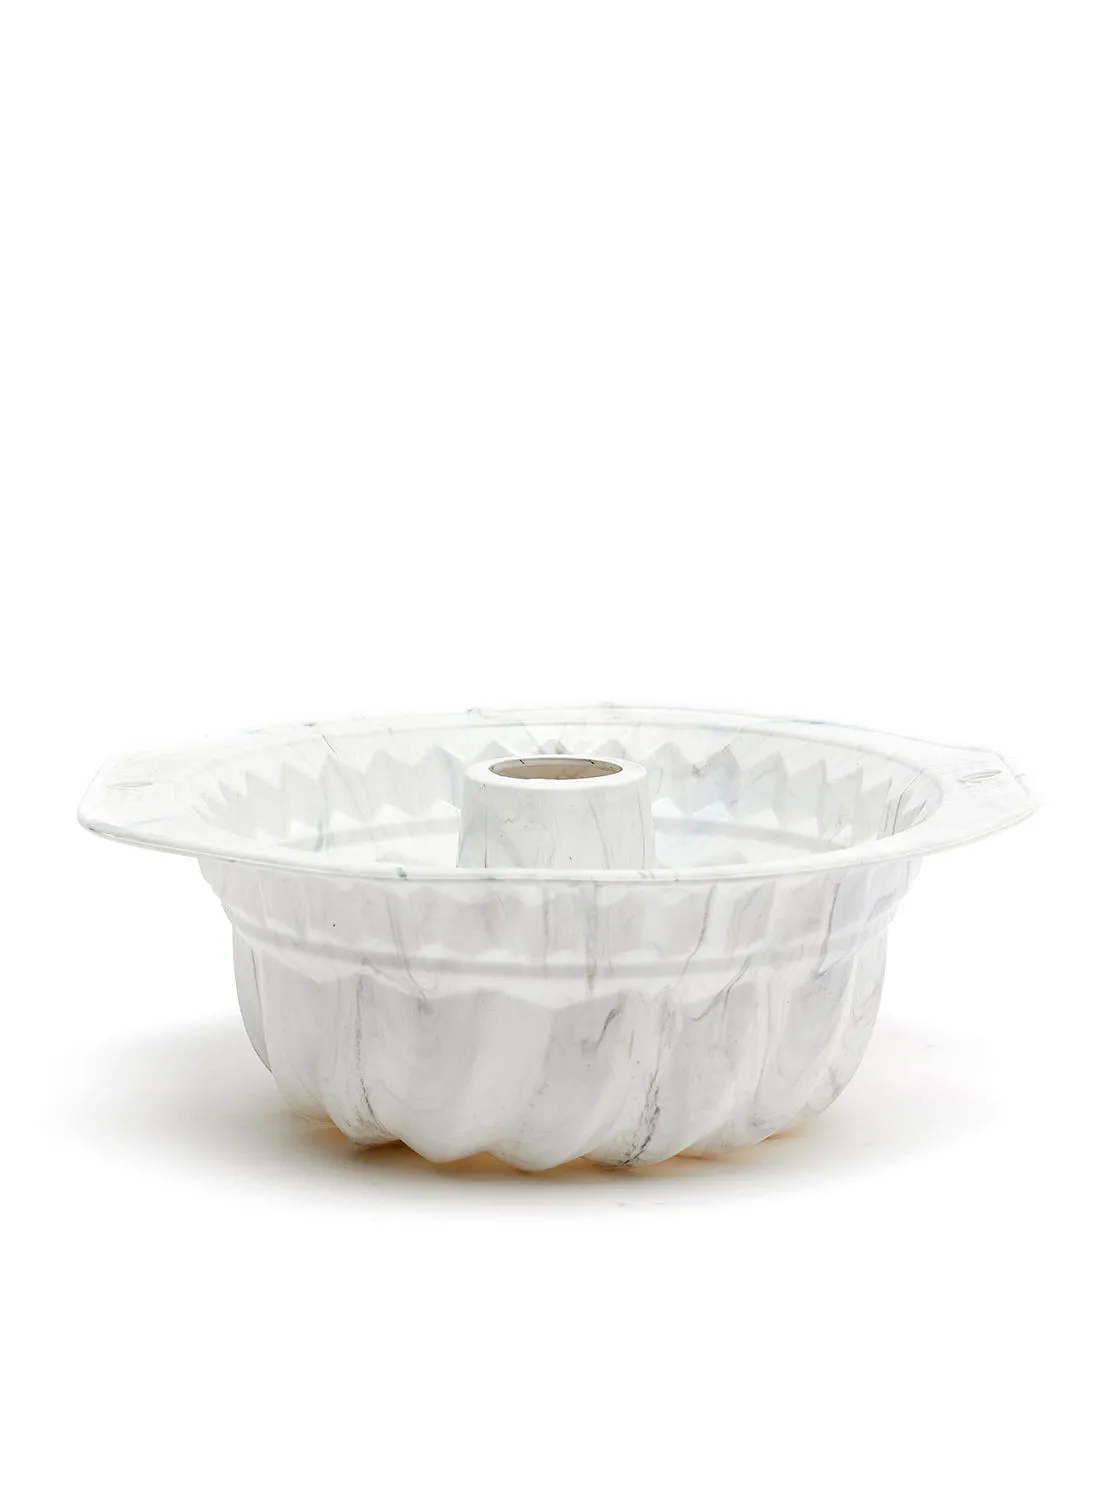 noon east Oven Pan - Made Of Silicone - Bundt 27 Cm - Baking Pan - Oven Trays - Cake Tray - Oven Pan - White/Marble